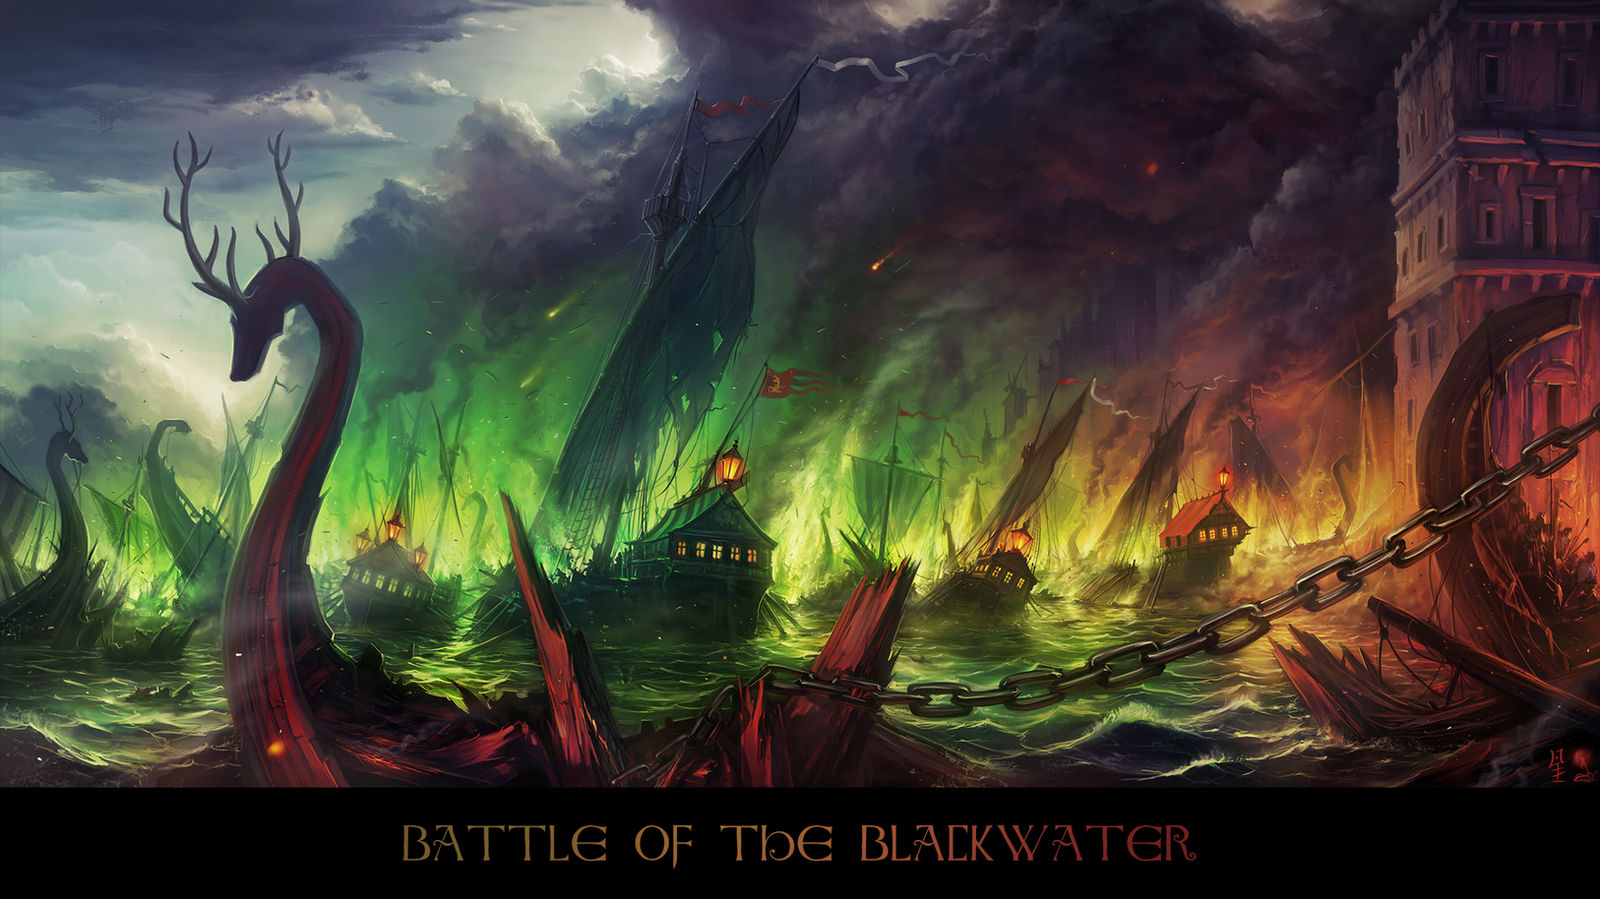 Battle of the Blackwater